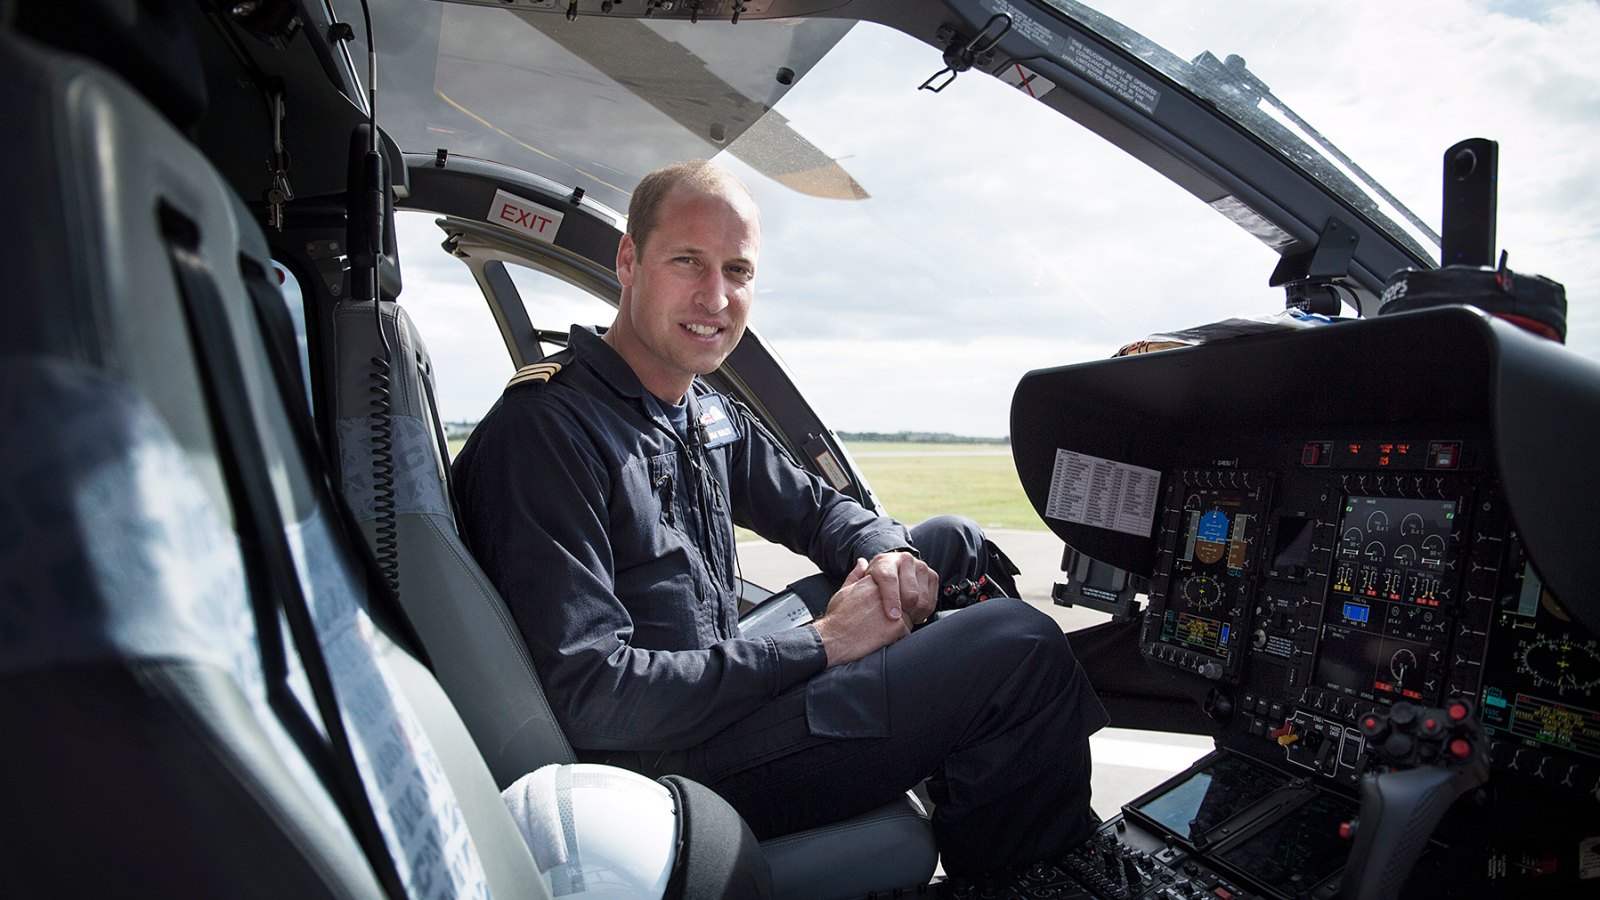 Prince William air ambulance helicopter